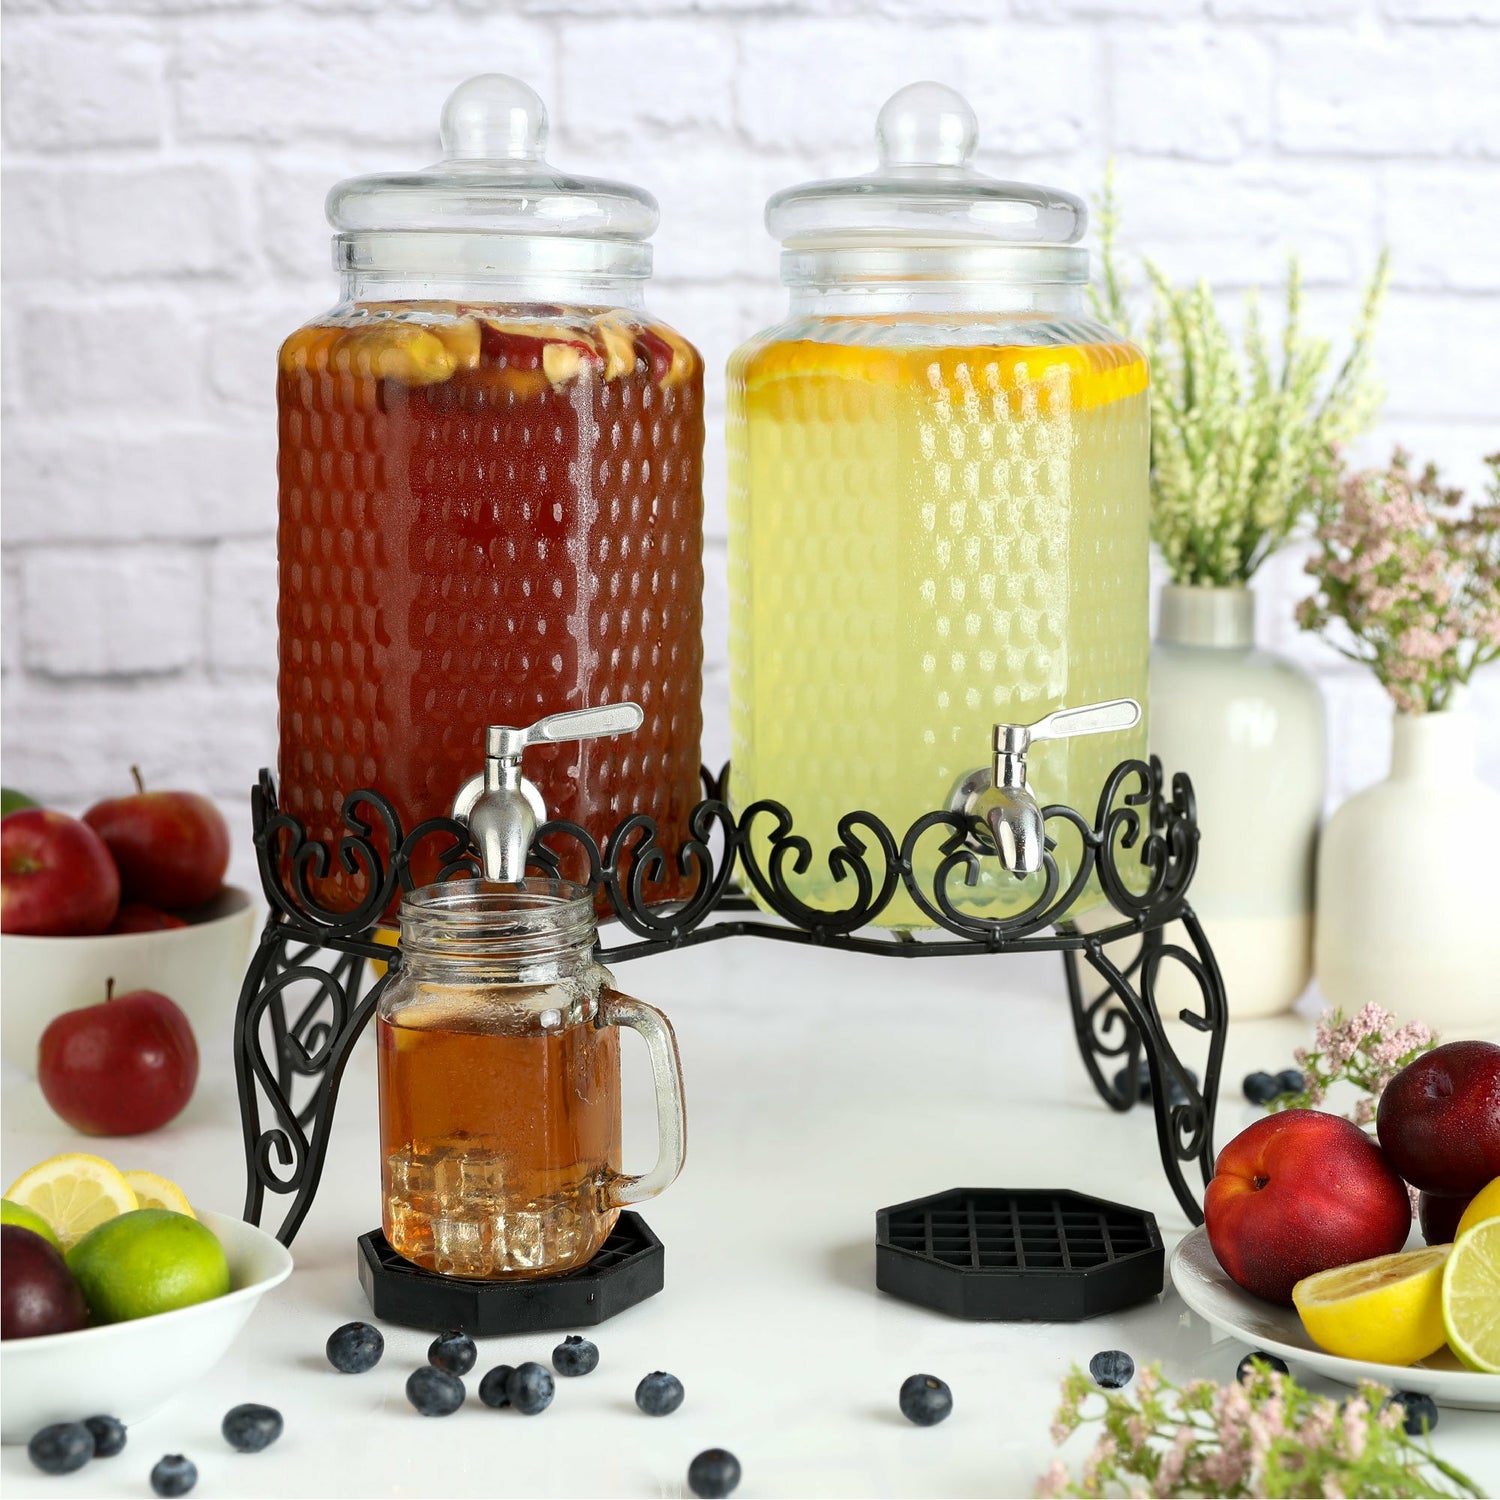 Double Beverage Dispenser Stand